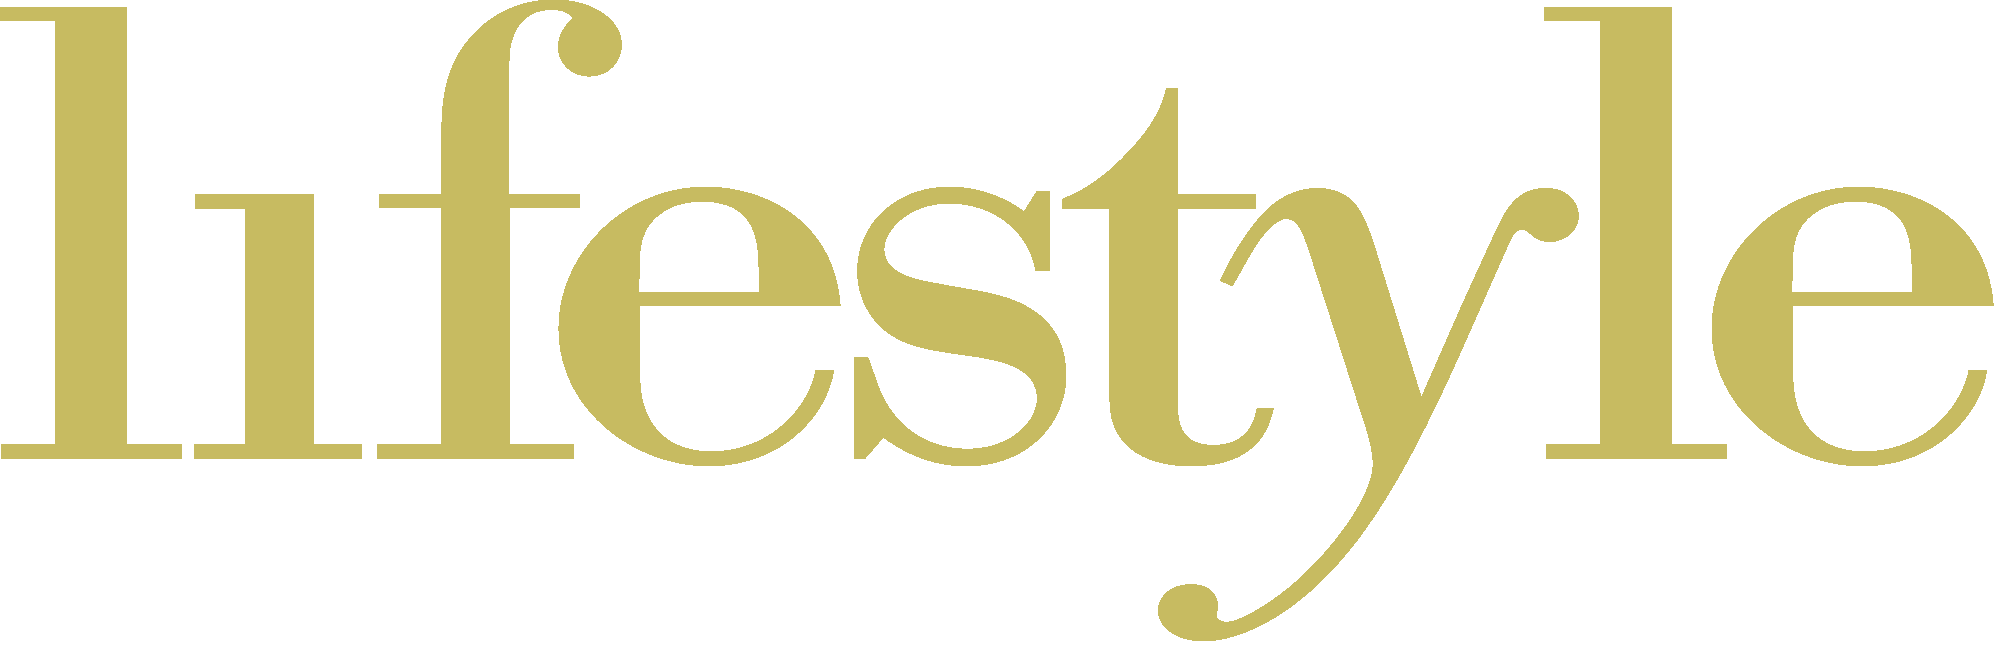 Lifestyle Property Agency - East Sydney - Real Estate Agency